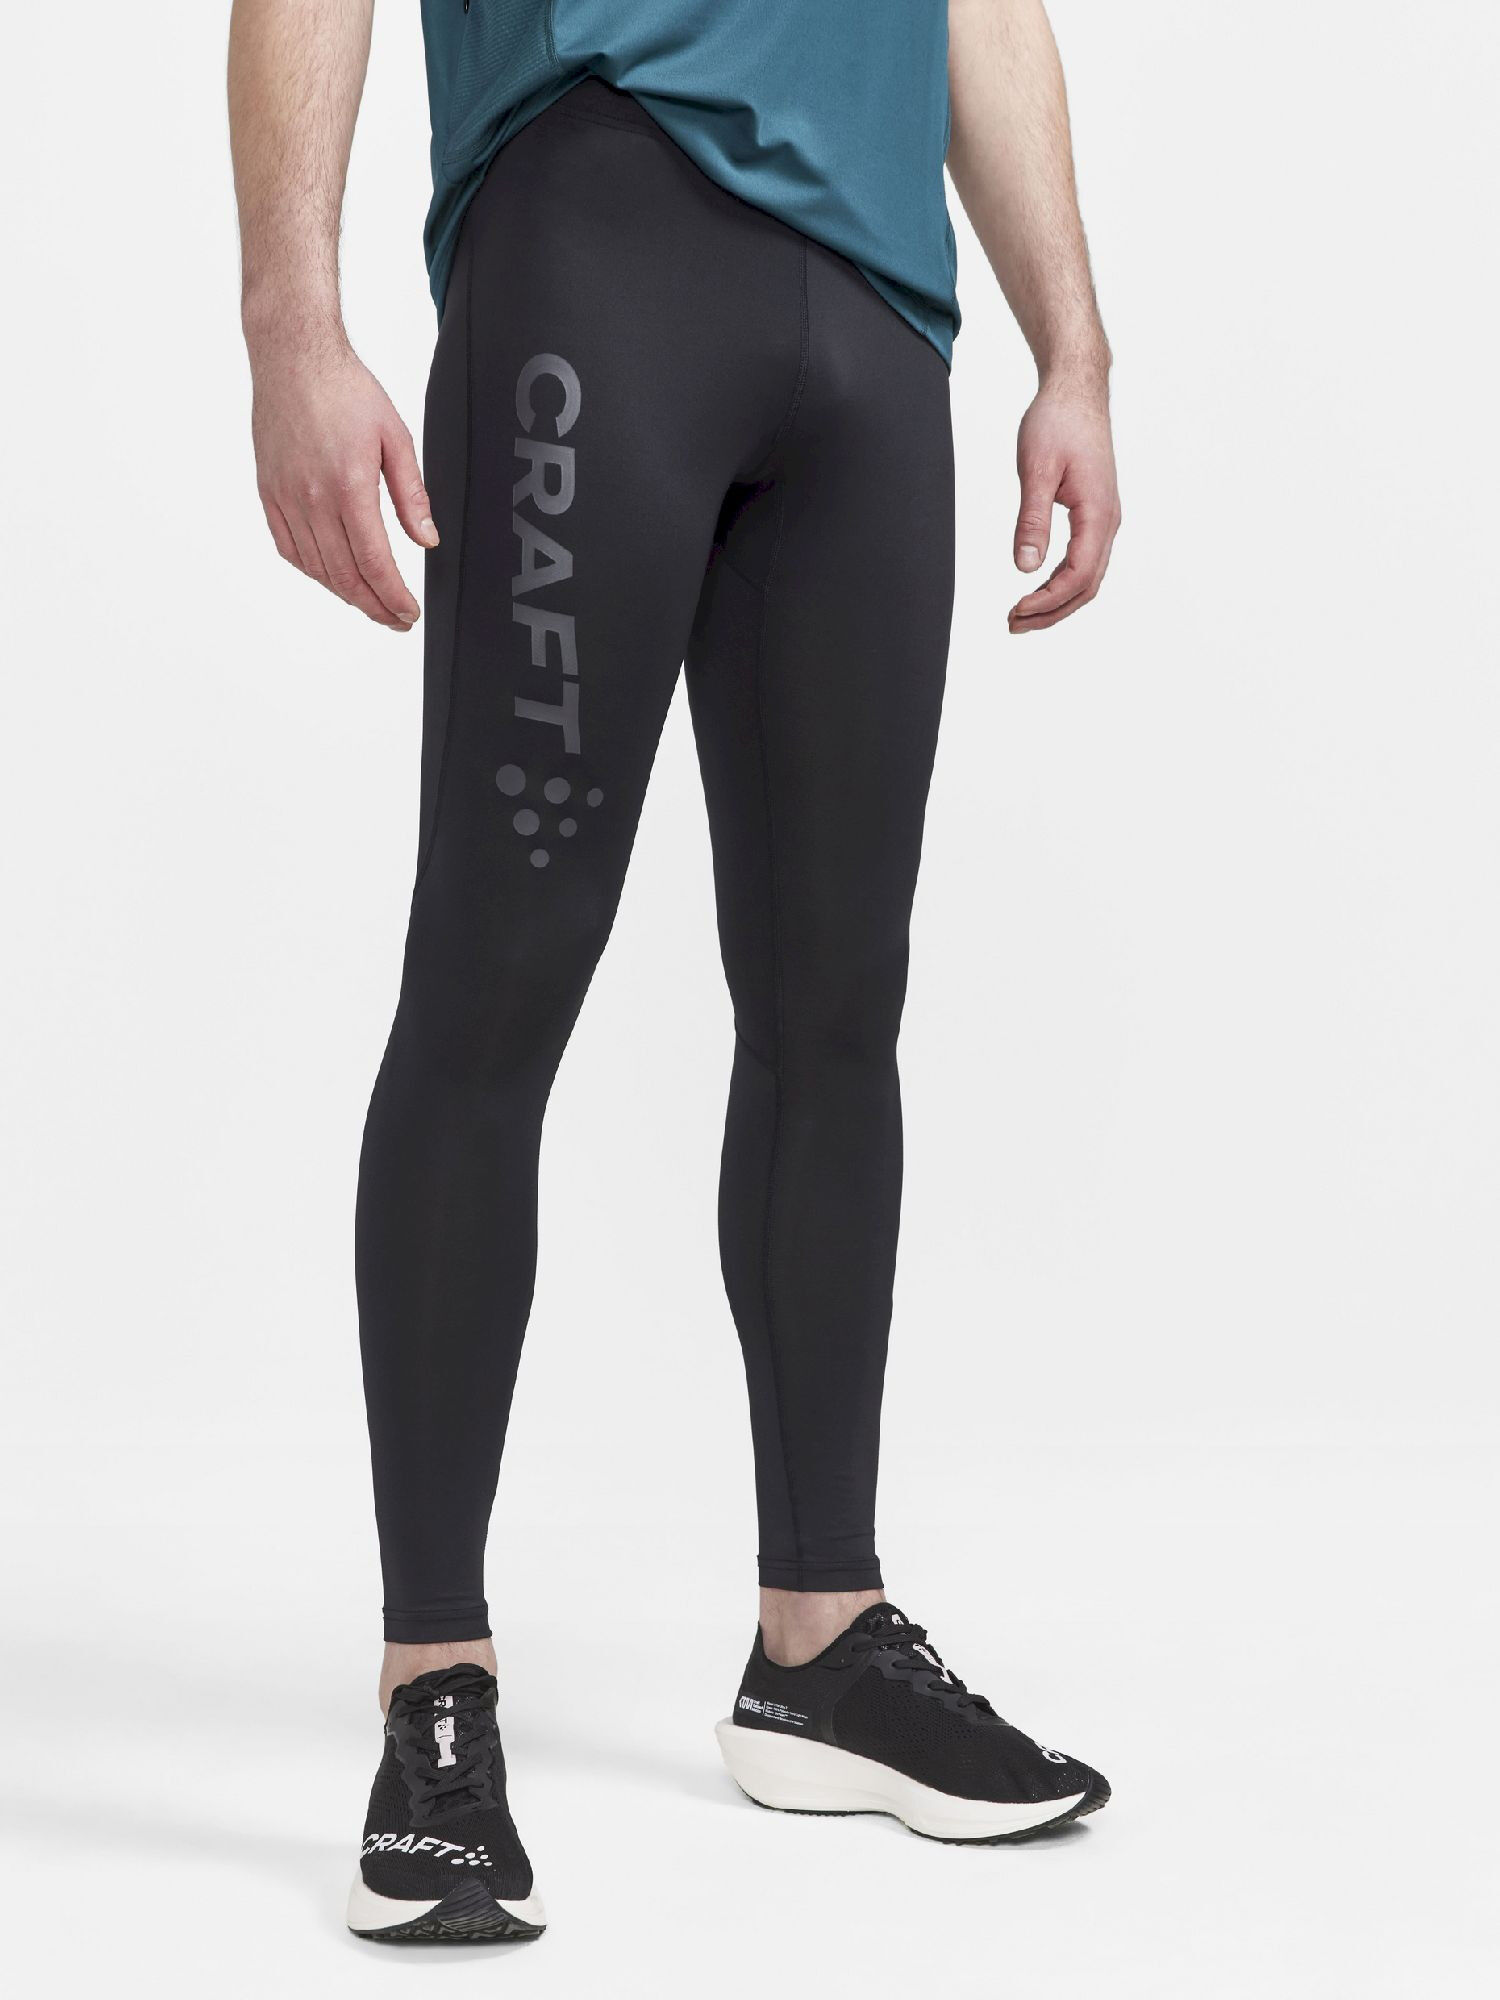 Craft Core Essence Tights - Collant running homme | Hardloop